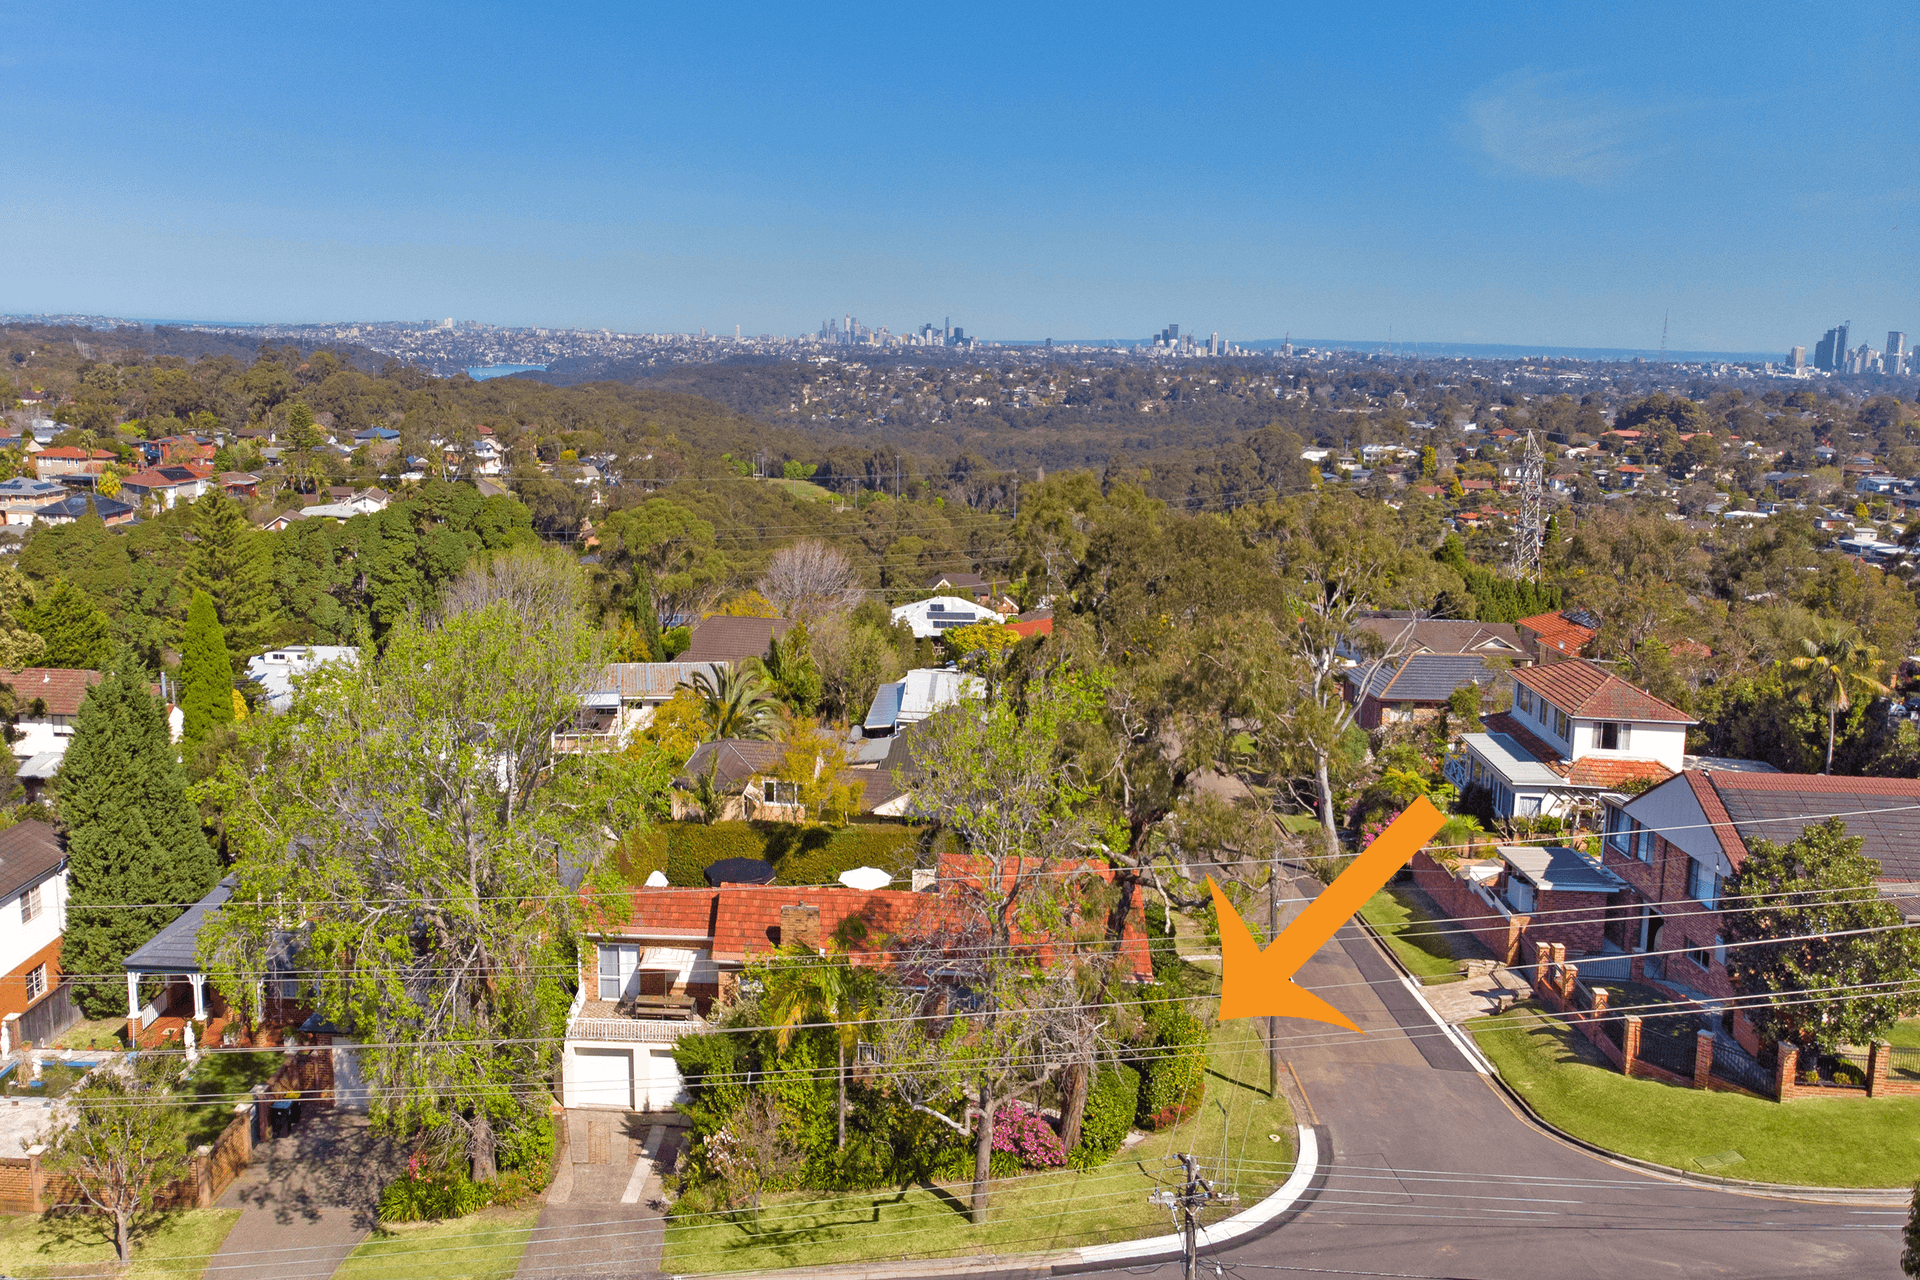 19 Fitzpatrick Avenue, Frenchs Forest, NSW 2086